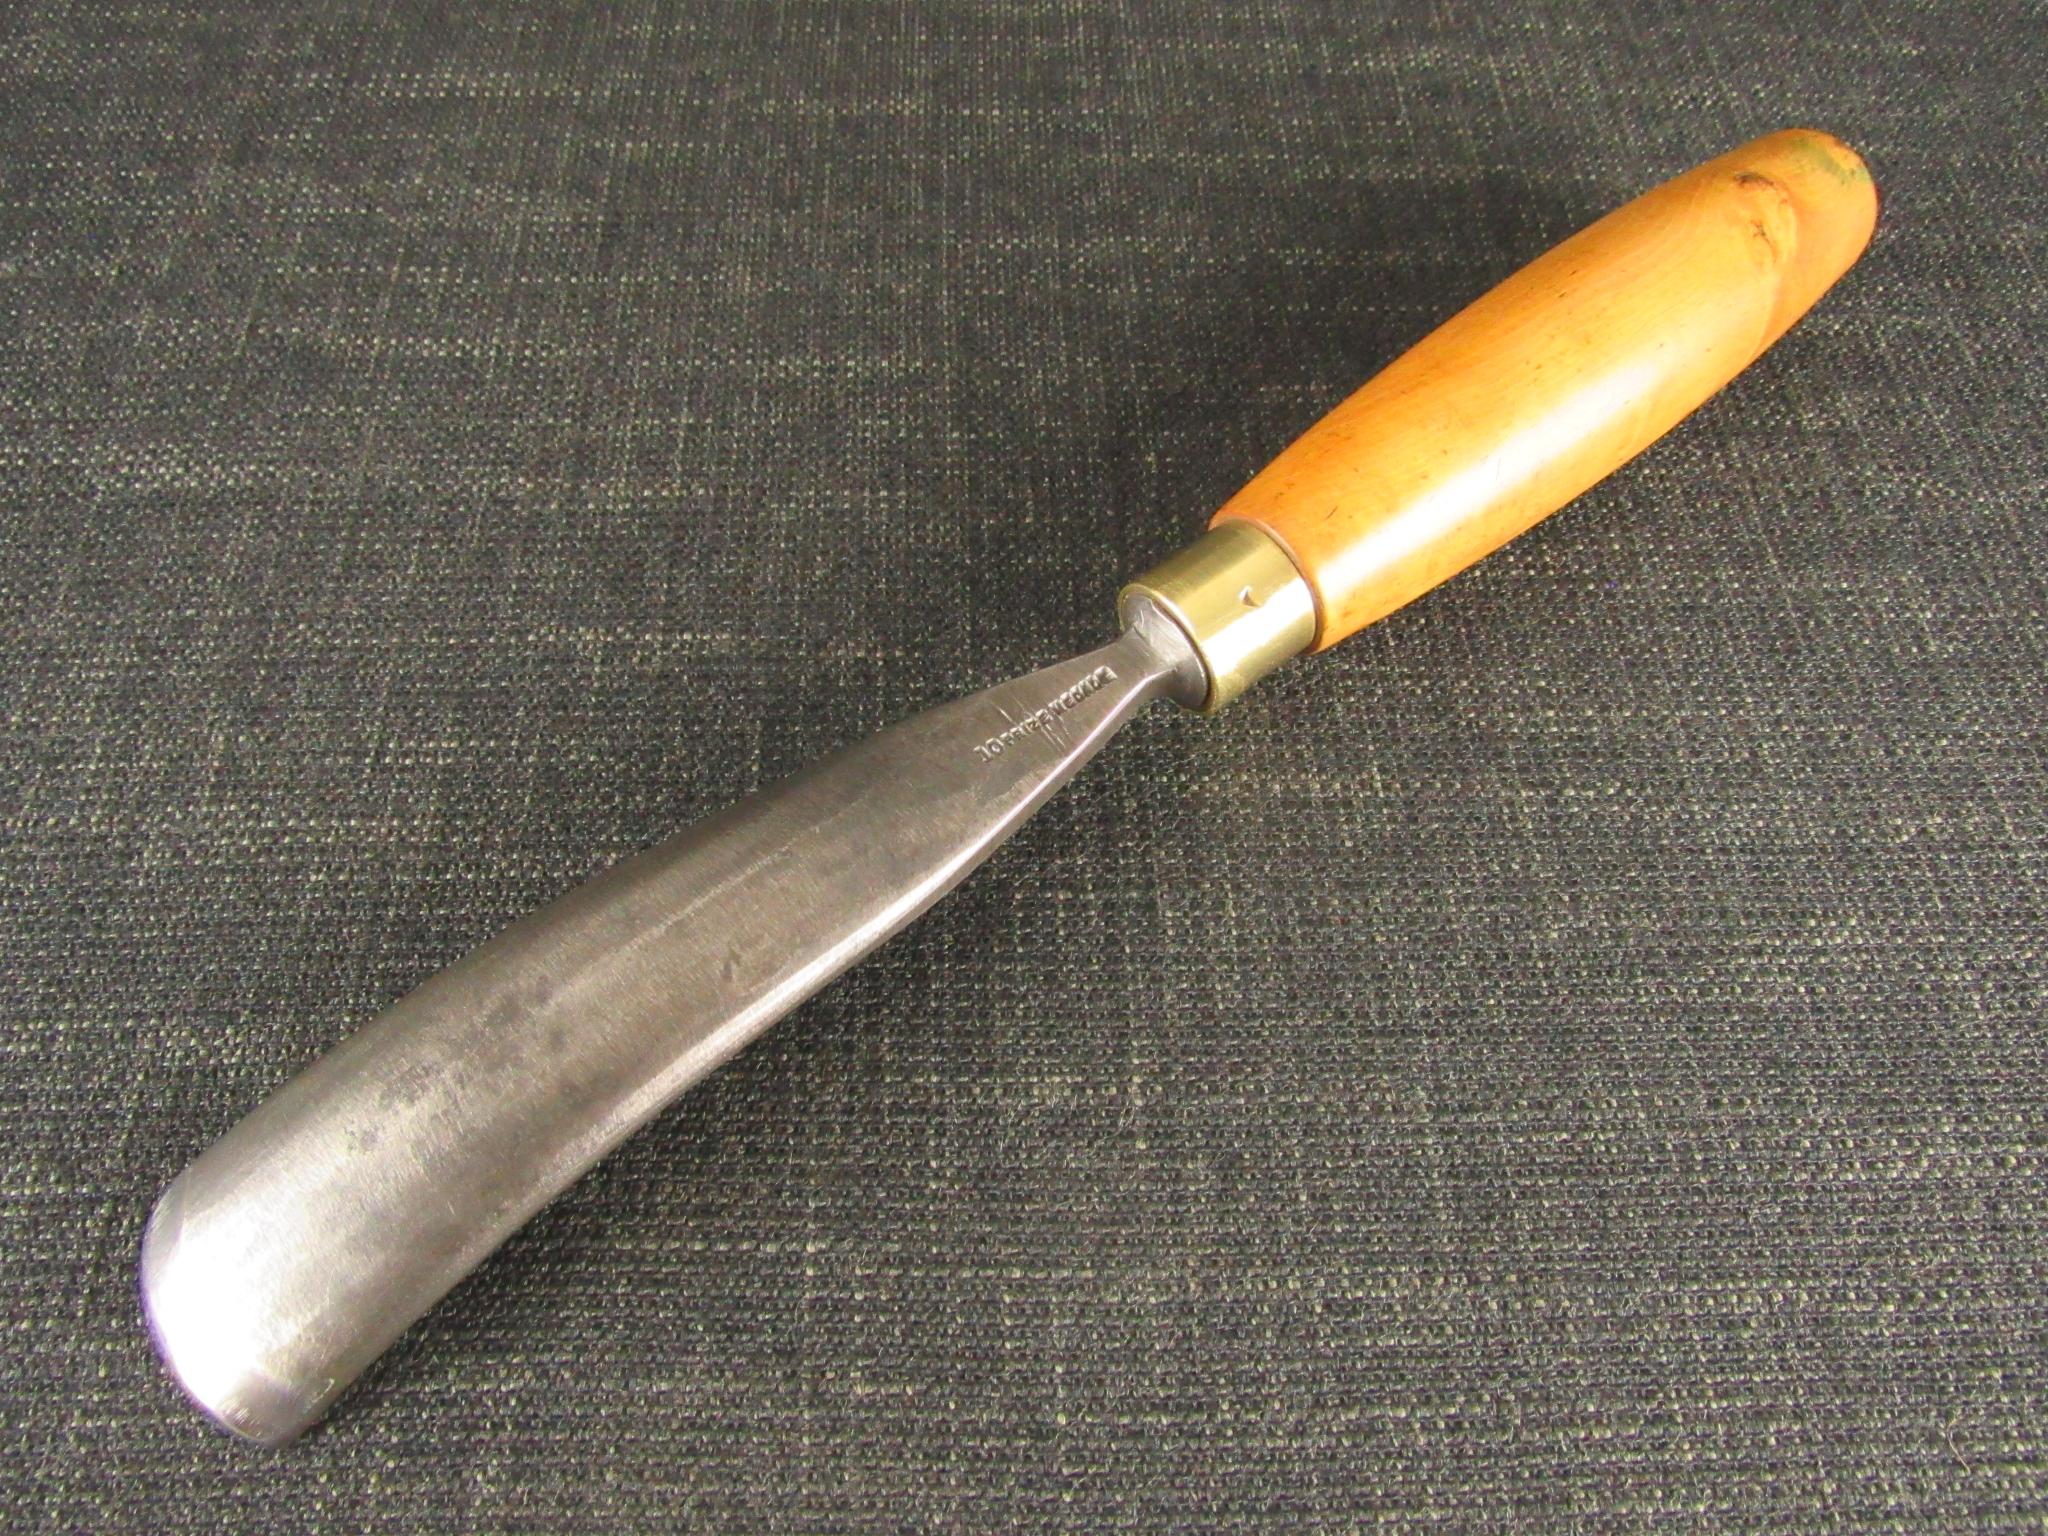 Large ADDIS No.15 Curved Carving Gouge - 1 5/16 inch